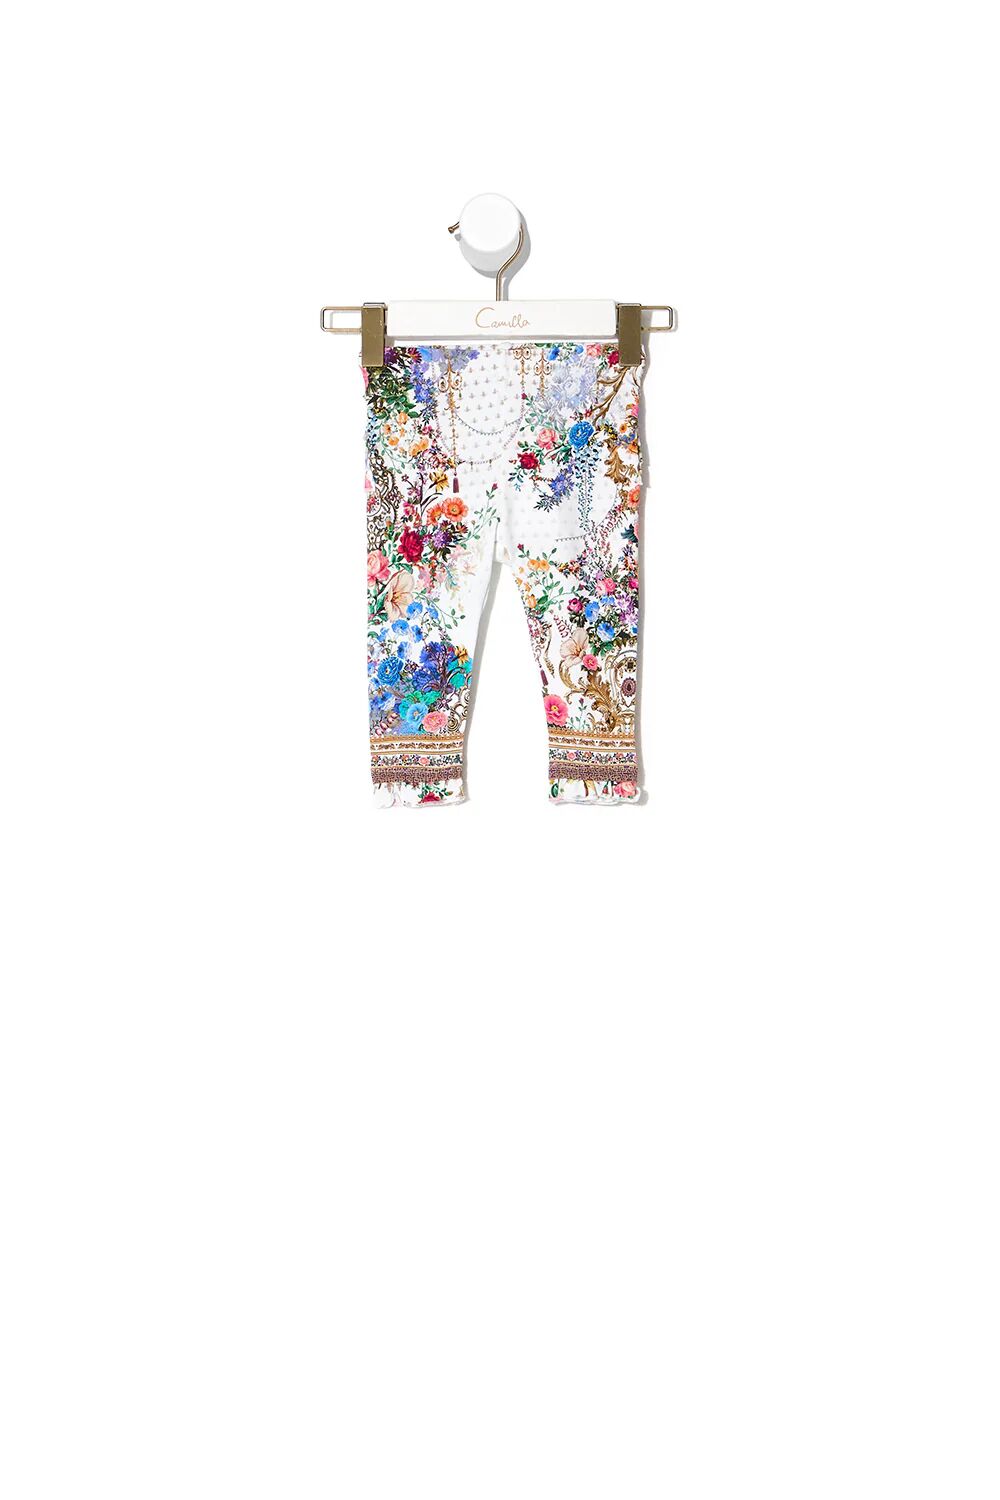 Camilla eBoutique Babies Leggings with Frills by the Meadow, 6/12MTHS  - Size: 6/12MTHS